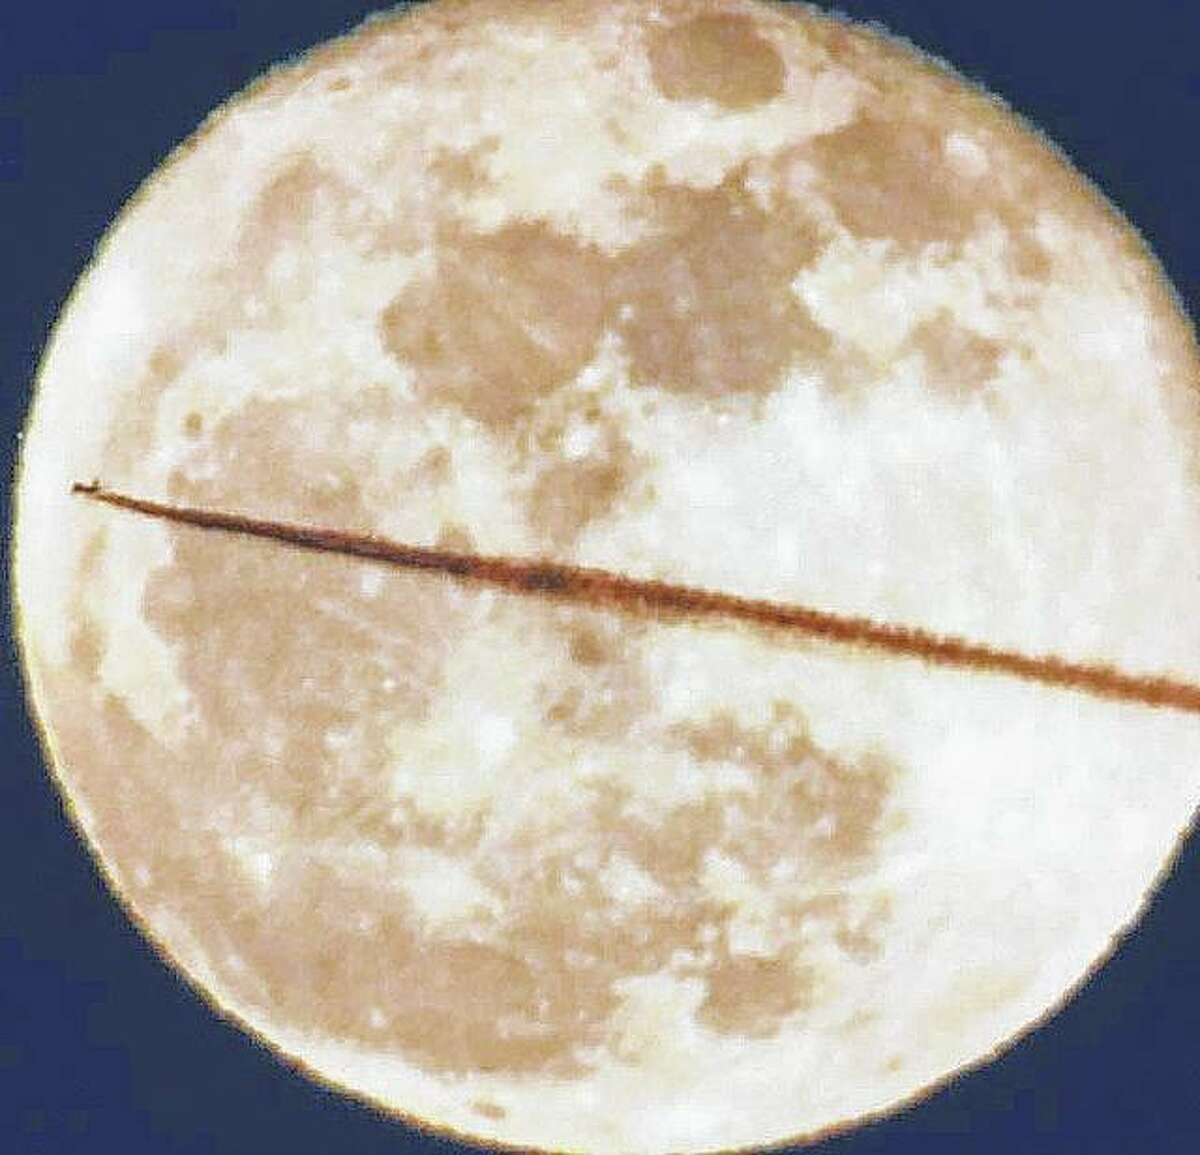 The vapor trail from a jet seems to cut a slice through the full moon.